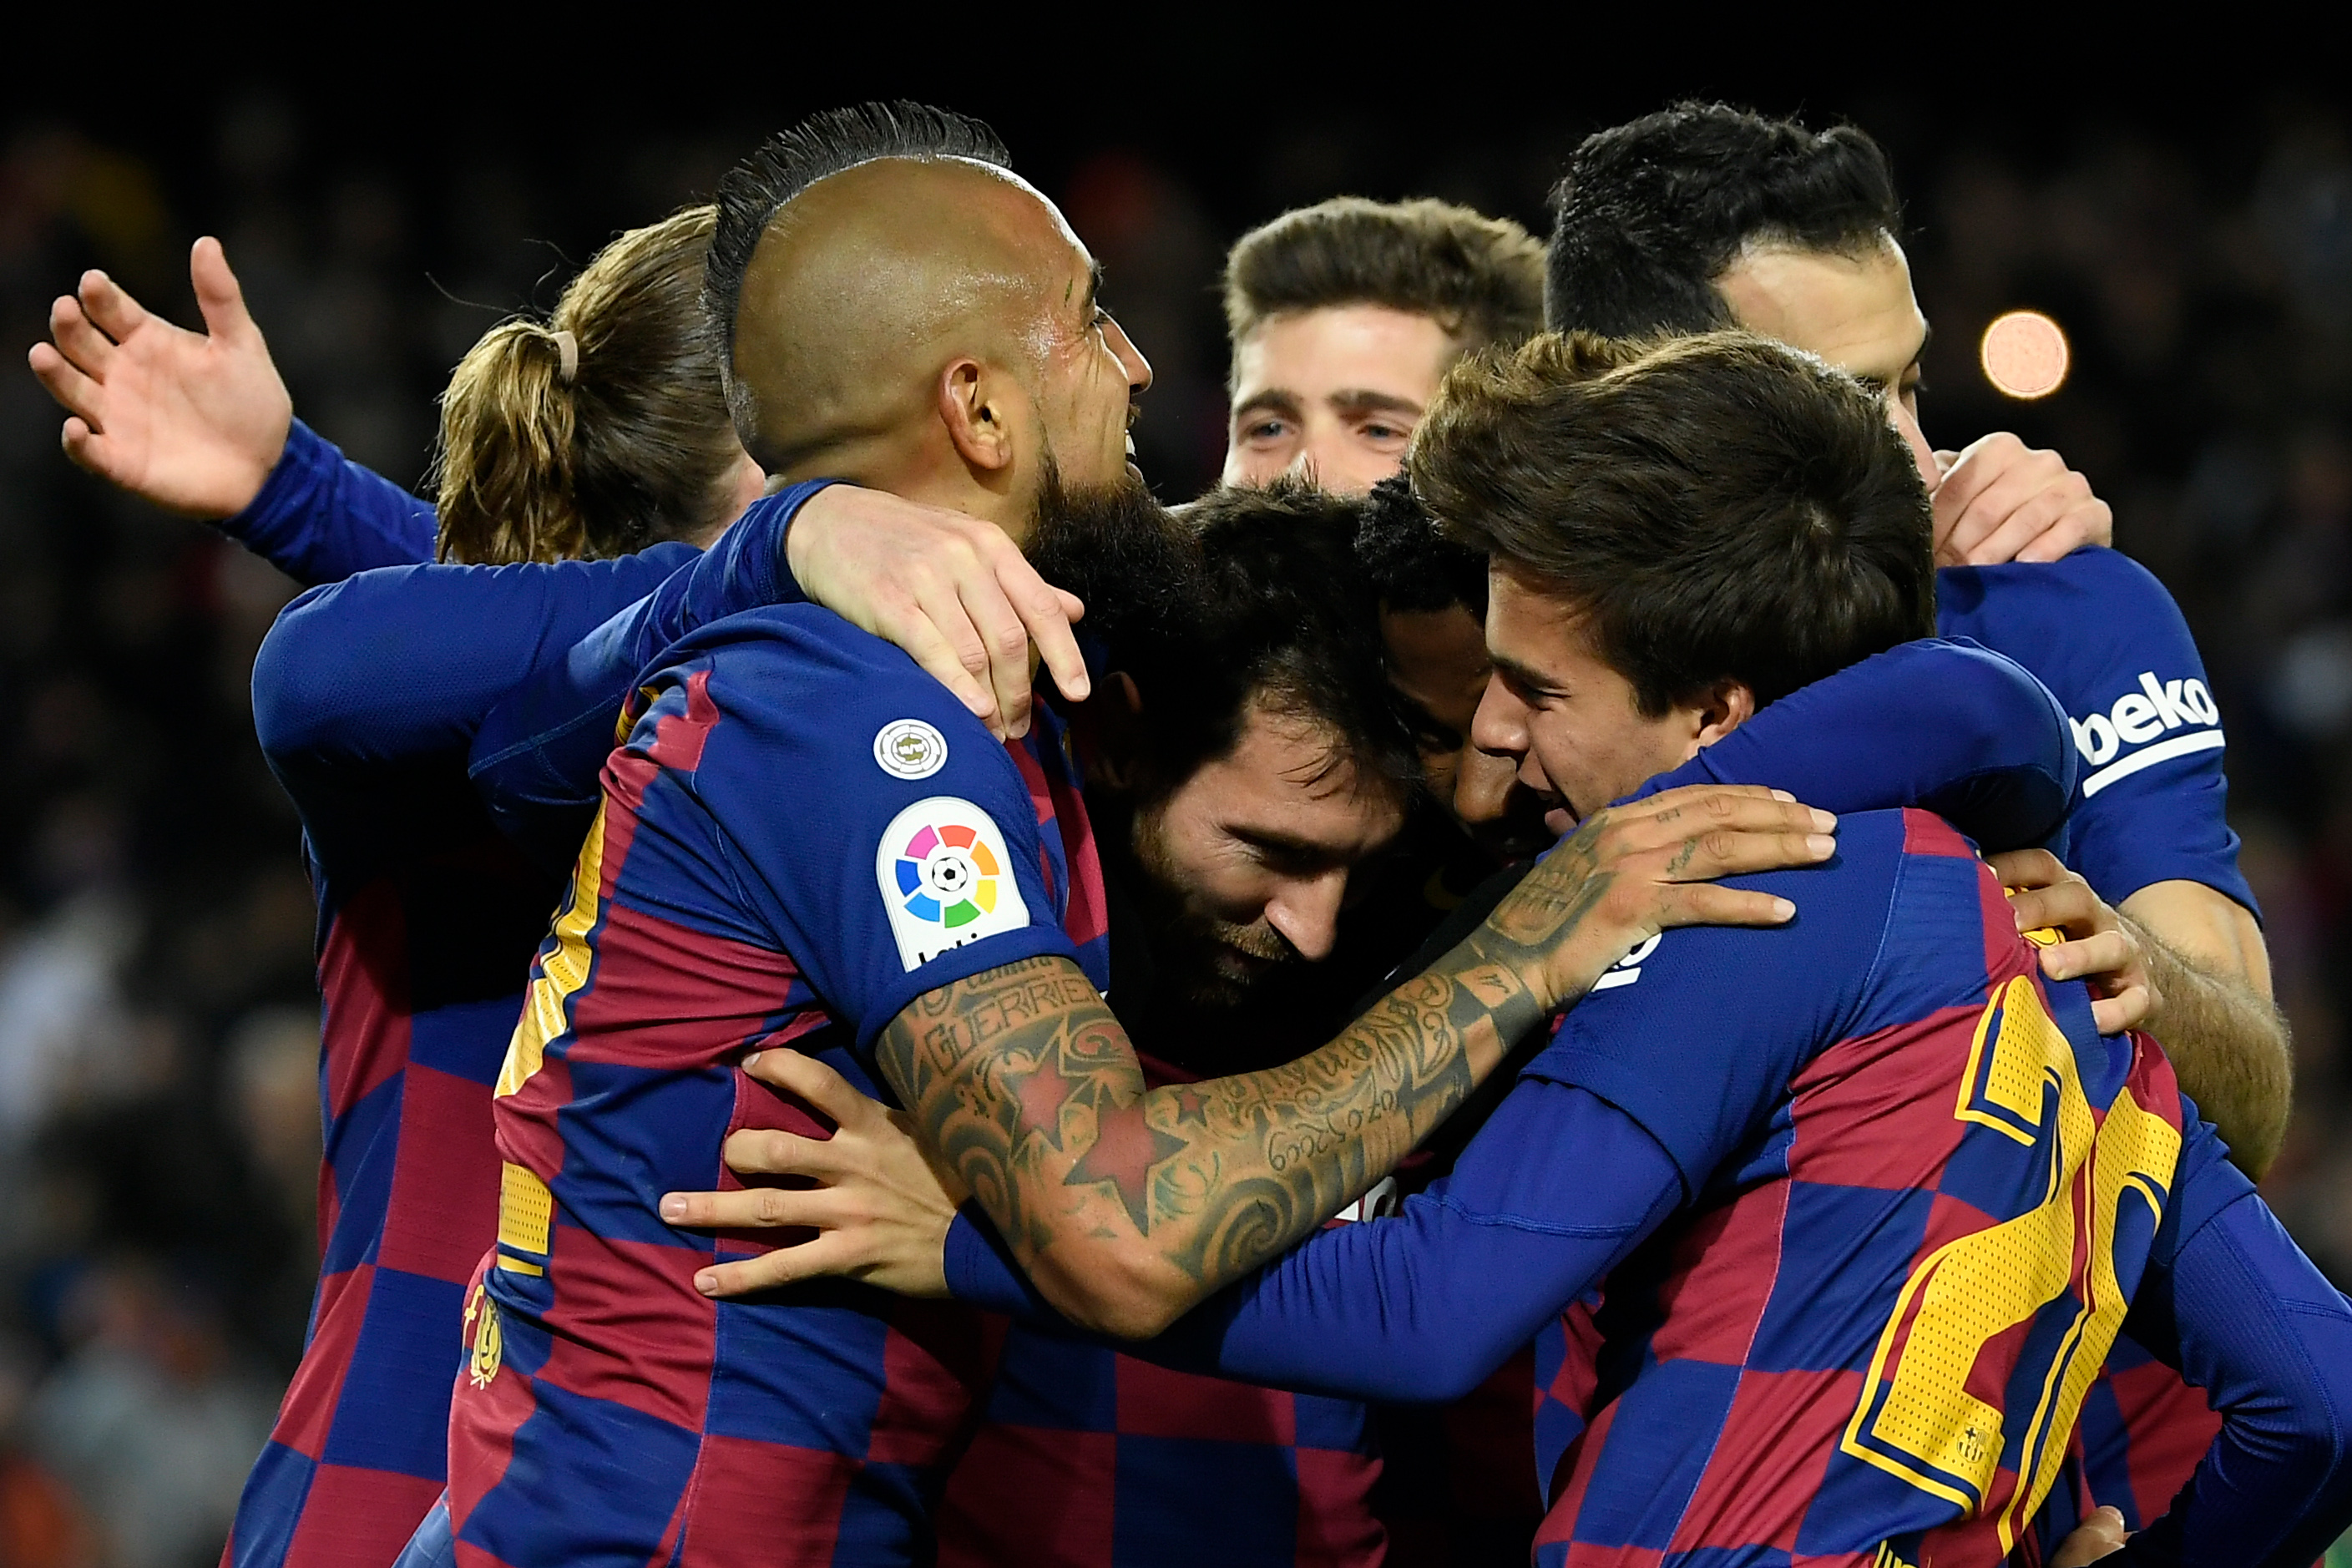 Barcelona's Argentine forward Lionel Messi (C) celebrates with teammates after scoring the opening goal during the Spanish league football match between FC Barcelona and Granada FC at the Camp Nou stadium in Barcelona on January 19, 2020. (Photo by LLUIS GENE / AFP) (Photo by LLUIS GENE/AFP via Getty Images)